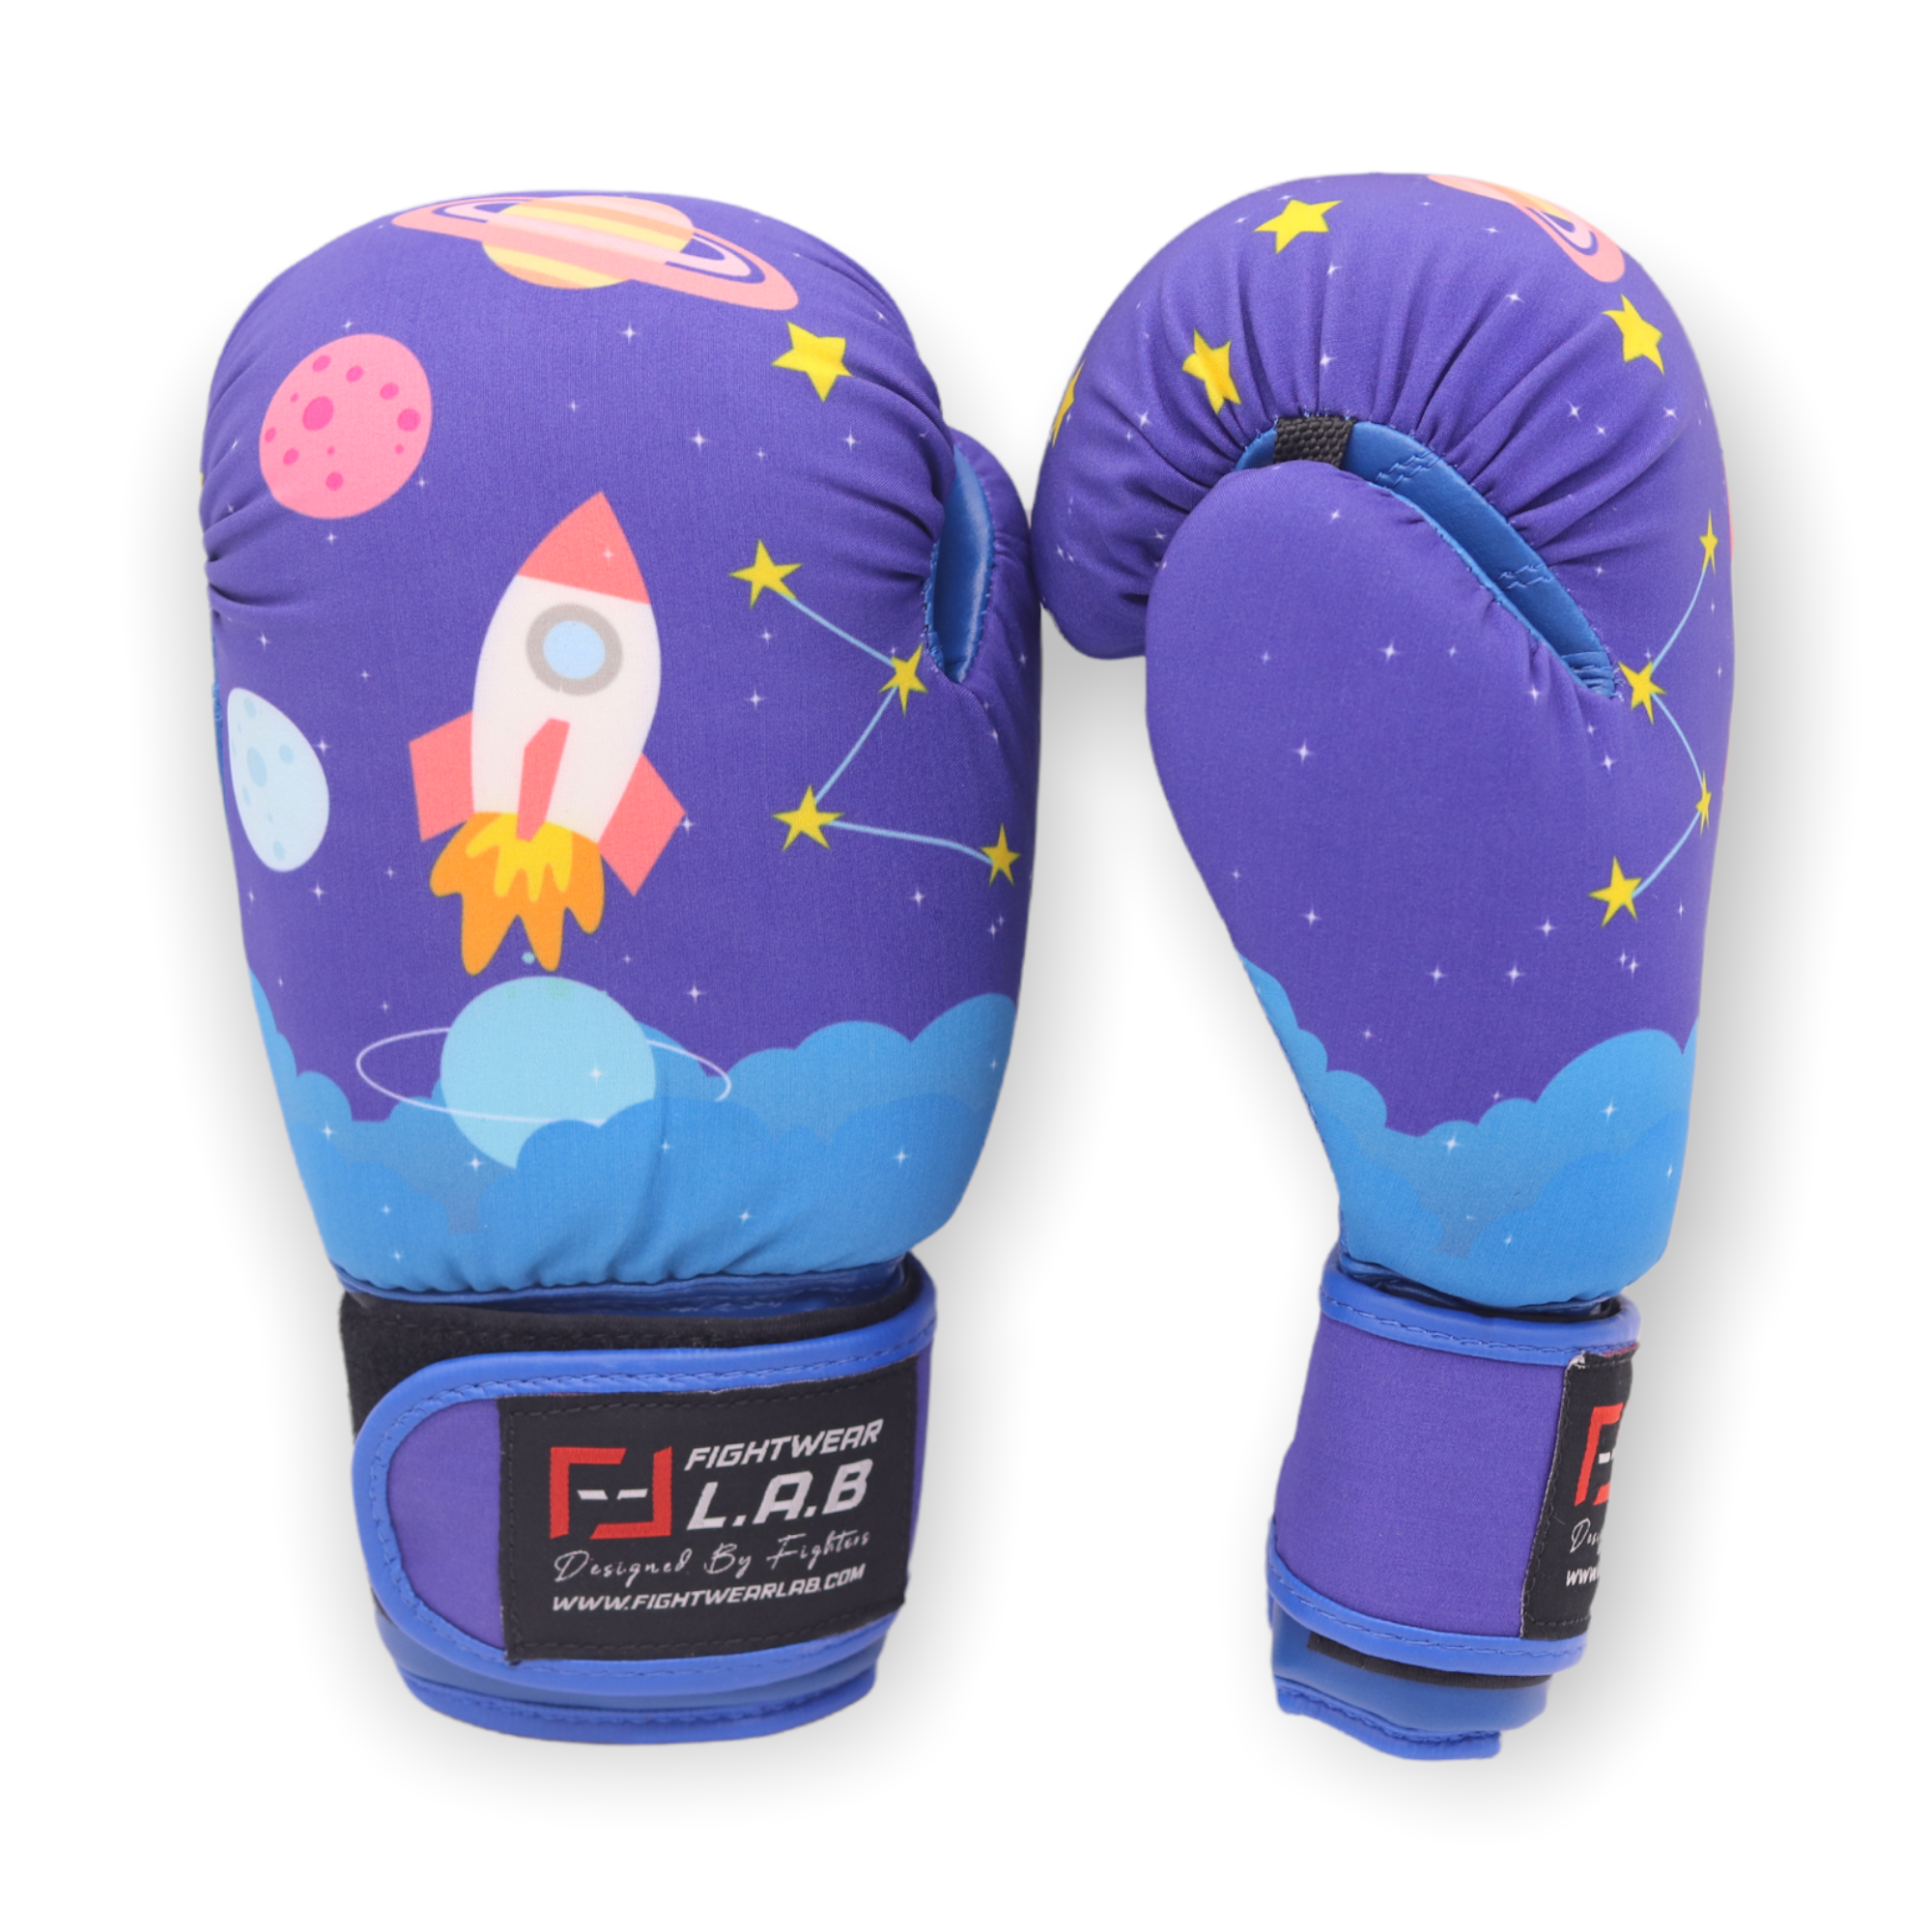 ASTRO Boxing Gloves